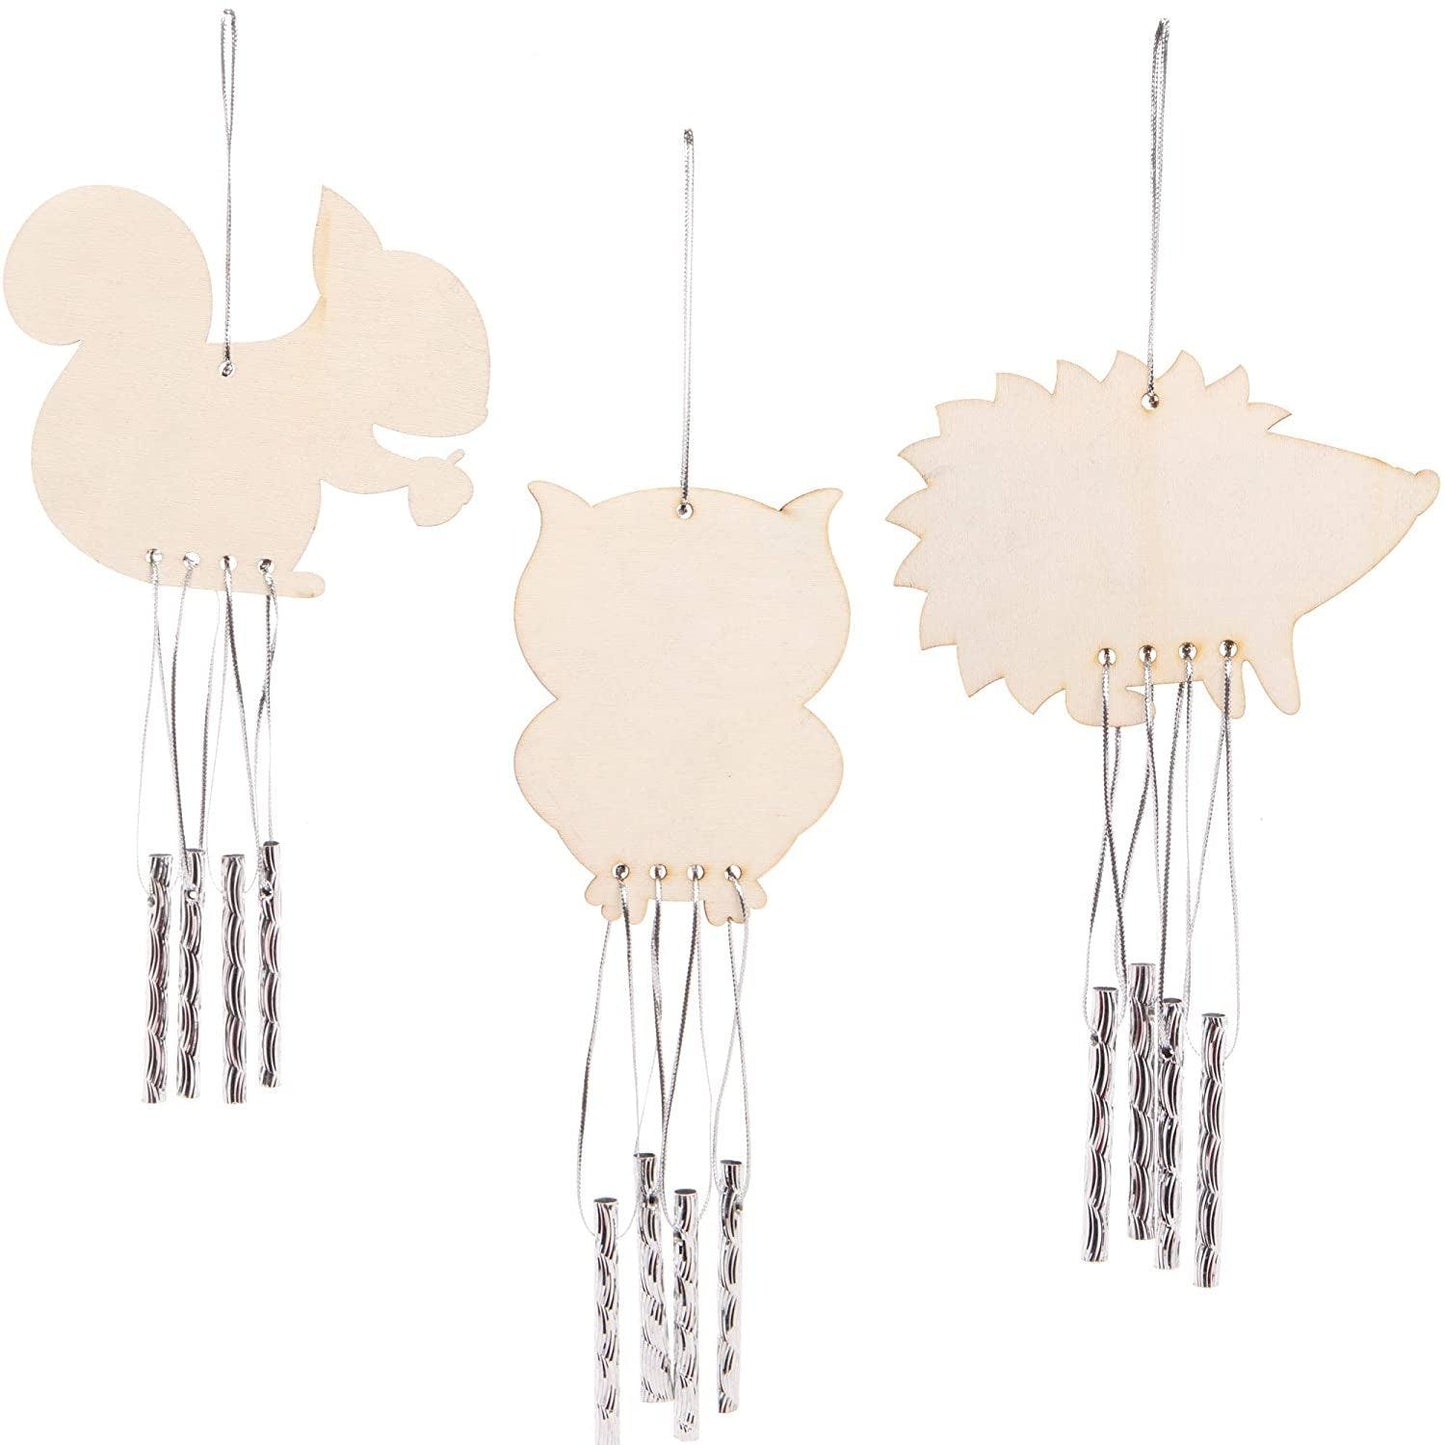 Woodland Critter Wooden Windchimes - Pack of 4, Musical Chime Kits for Kids Arts and Crafts Projects - WoodArtSupply